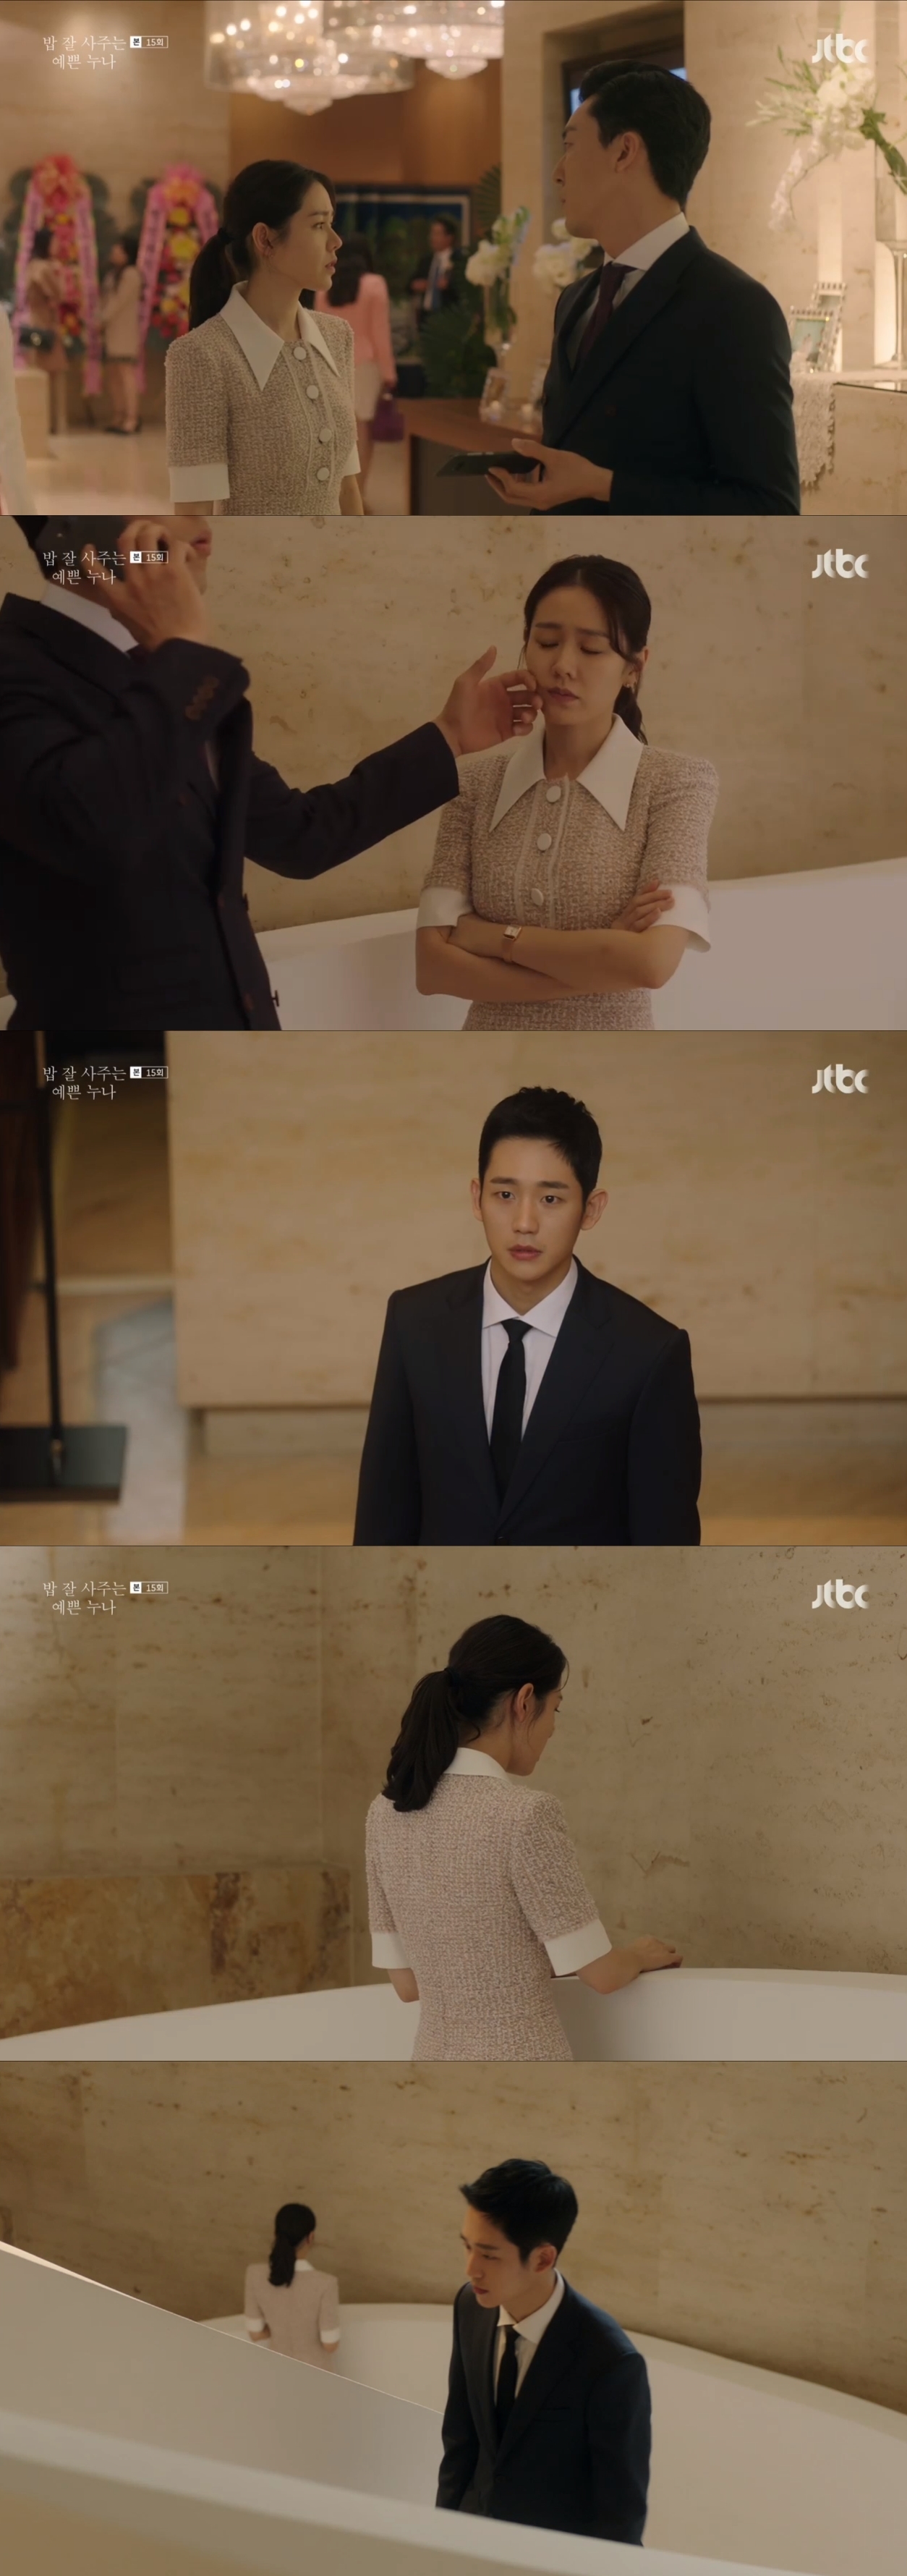 Seoul = = Pretty Sister Son Ye-jin has parted ways with Jung Hae InJTBCs Bob Good Sister, which aired at 11 p.m. on the 18th, depicted the figure of Seo Jun-hee (Jung Hae In), who proposed to Yoon Jin-ah (Son Ye-jin) to United States of America.On this day, Yoon Jin-ah realized that his work was more important than love; he presented his birthday necklace and said, I went to United States of America.Lets go together, Seo Jun-hee let go, and eventually the two parted ways.The two men, who broke up after a hearty hug, reunited at the Yang Seung-ho (who was the one who gave it to them) marriage ceremony over time.Seeking Yoon Jin-ah with another man, Seo Jun-hee passed him by pretending not to know.After the farewell, Yoon Seung-ho was reunited for a long time at the wedding ceremony, but it became a situation where they could not hold each others hands with hot love as before.Yon Jin-ah said: If it had been me before, I would have followed up even if I wanted to go right now, but now Im too covered.Seo Jun-hee made me an adult. He rejected the proposal of Seo Jun-hee. He looked at himself growing up and chose to do things rather than love.Yoon Jin-ah chose to part ways with Seo Jun-hee on the grounds of growth.In the meantime, while there was no way to confirm how long it had passed, the figure of Yoon Jin-ah, who formed a strange relationship with a questionable man who was supposed to be a new boyfriend, was enough to give sweet potatoes.Pretty Sister is running toward the end with confusion to the audience in the situation where only one time is left to End.